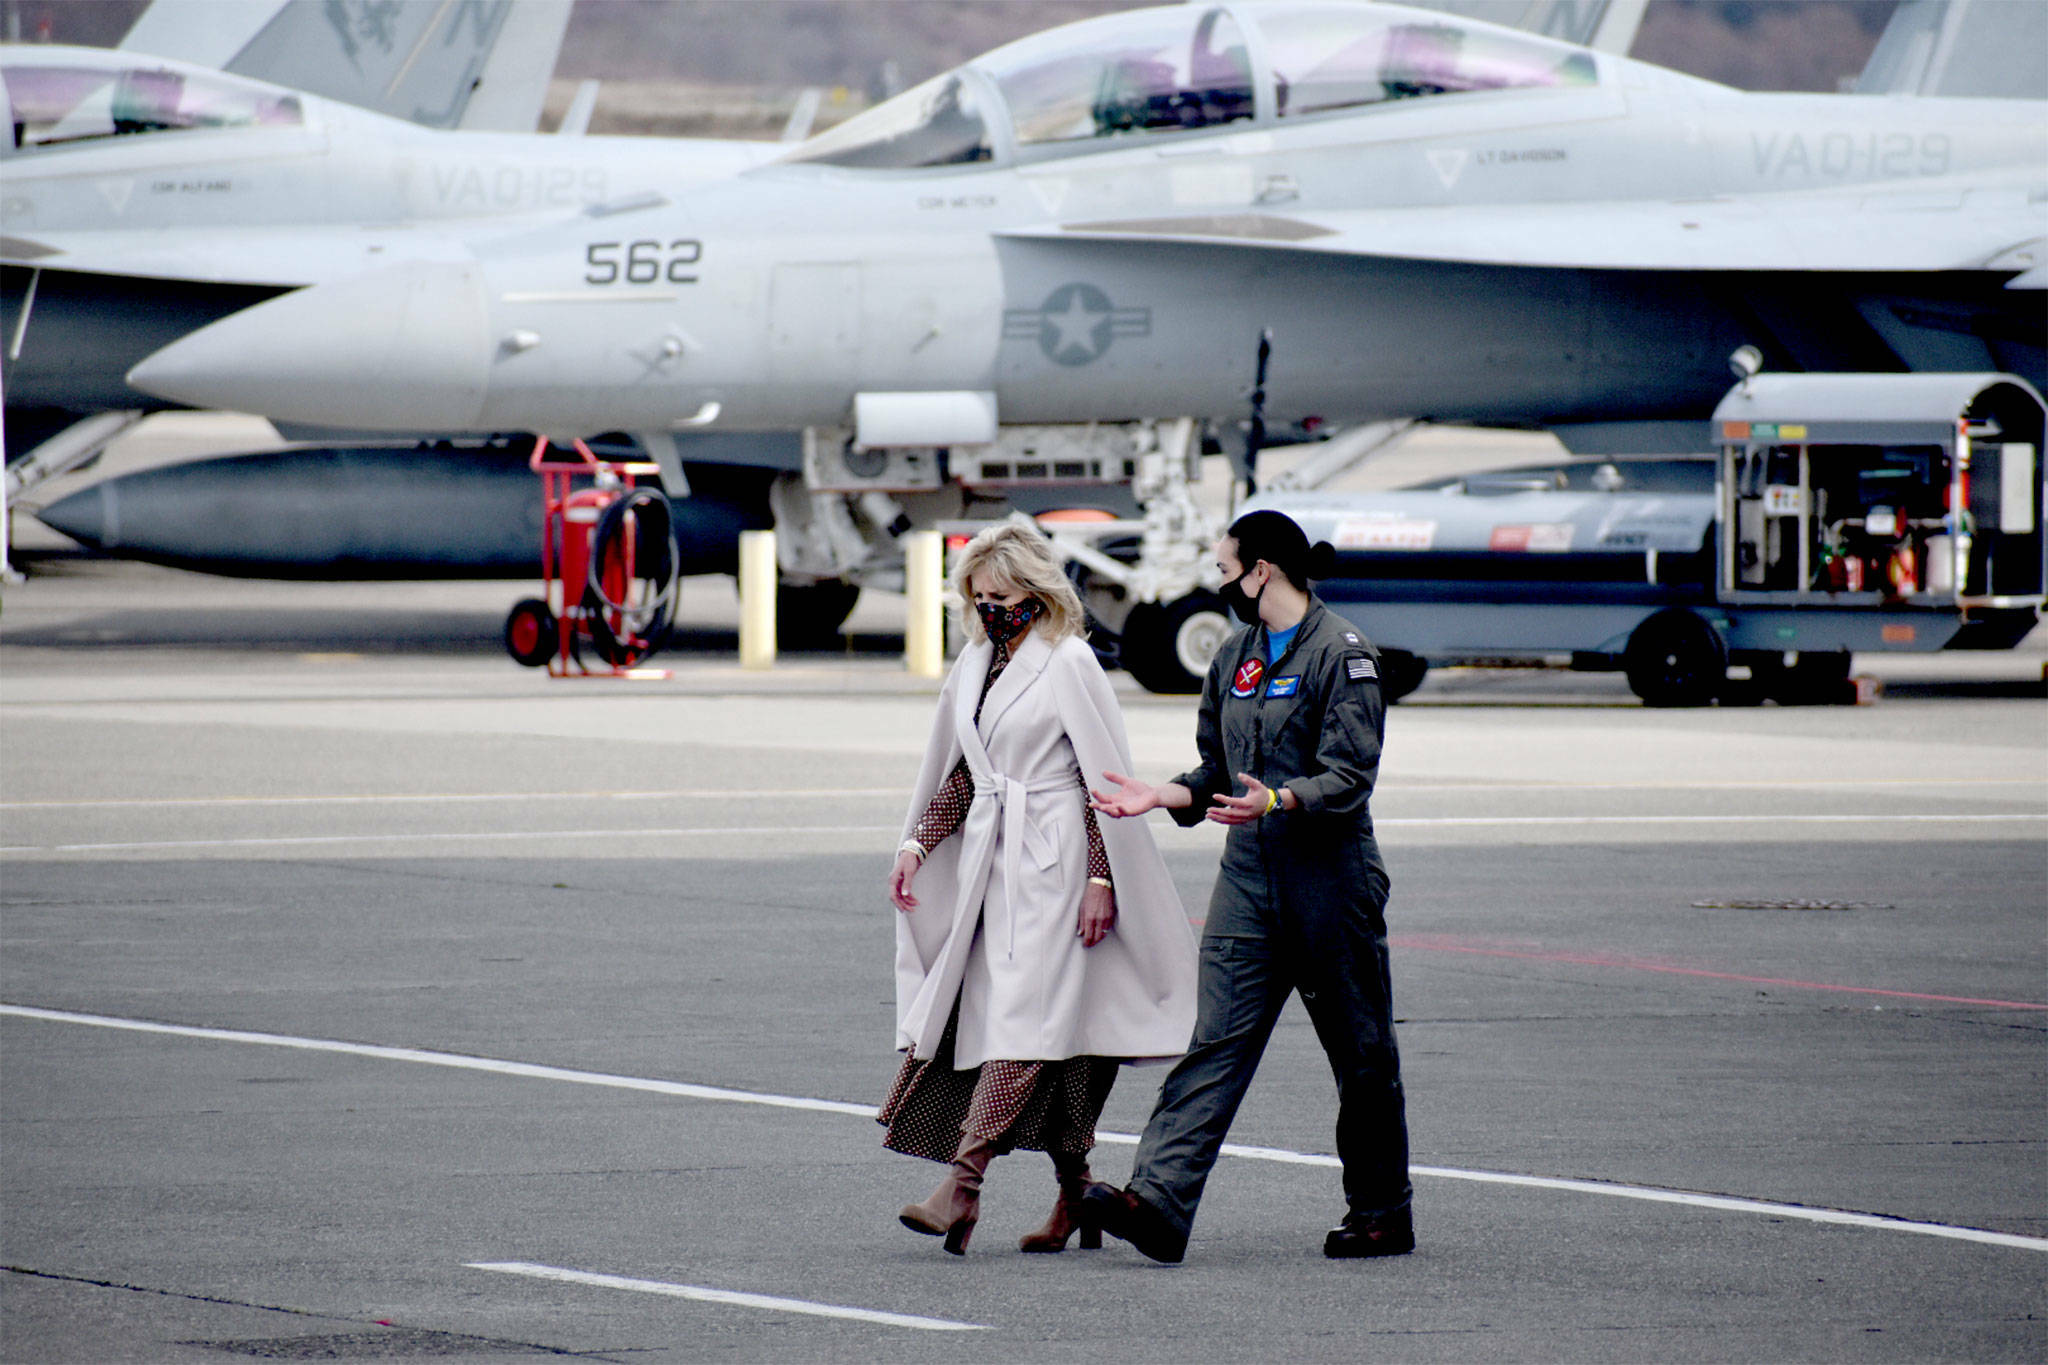 First Lady Jill Biden visited the base March 9 to meet with military families to listen to their concerns. (File photo by Emily Gilbert/Whidbey News-Times)